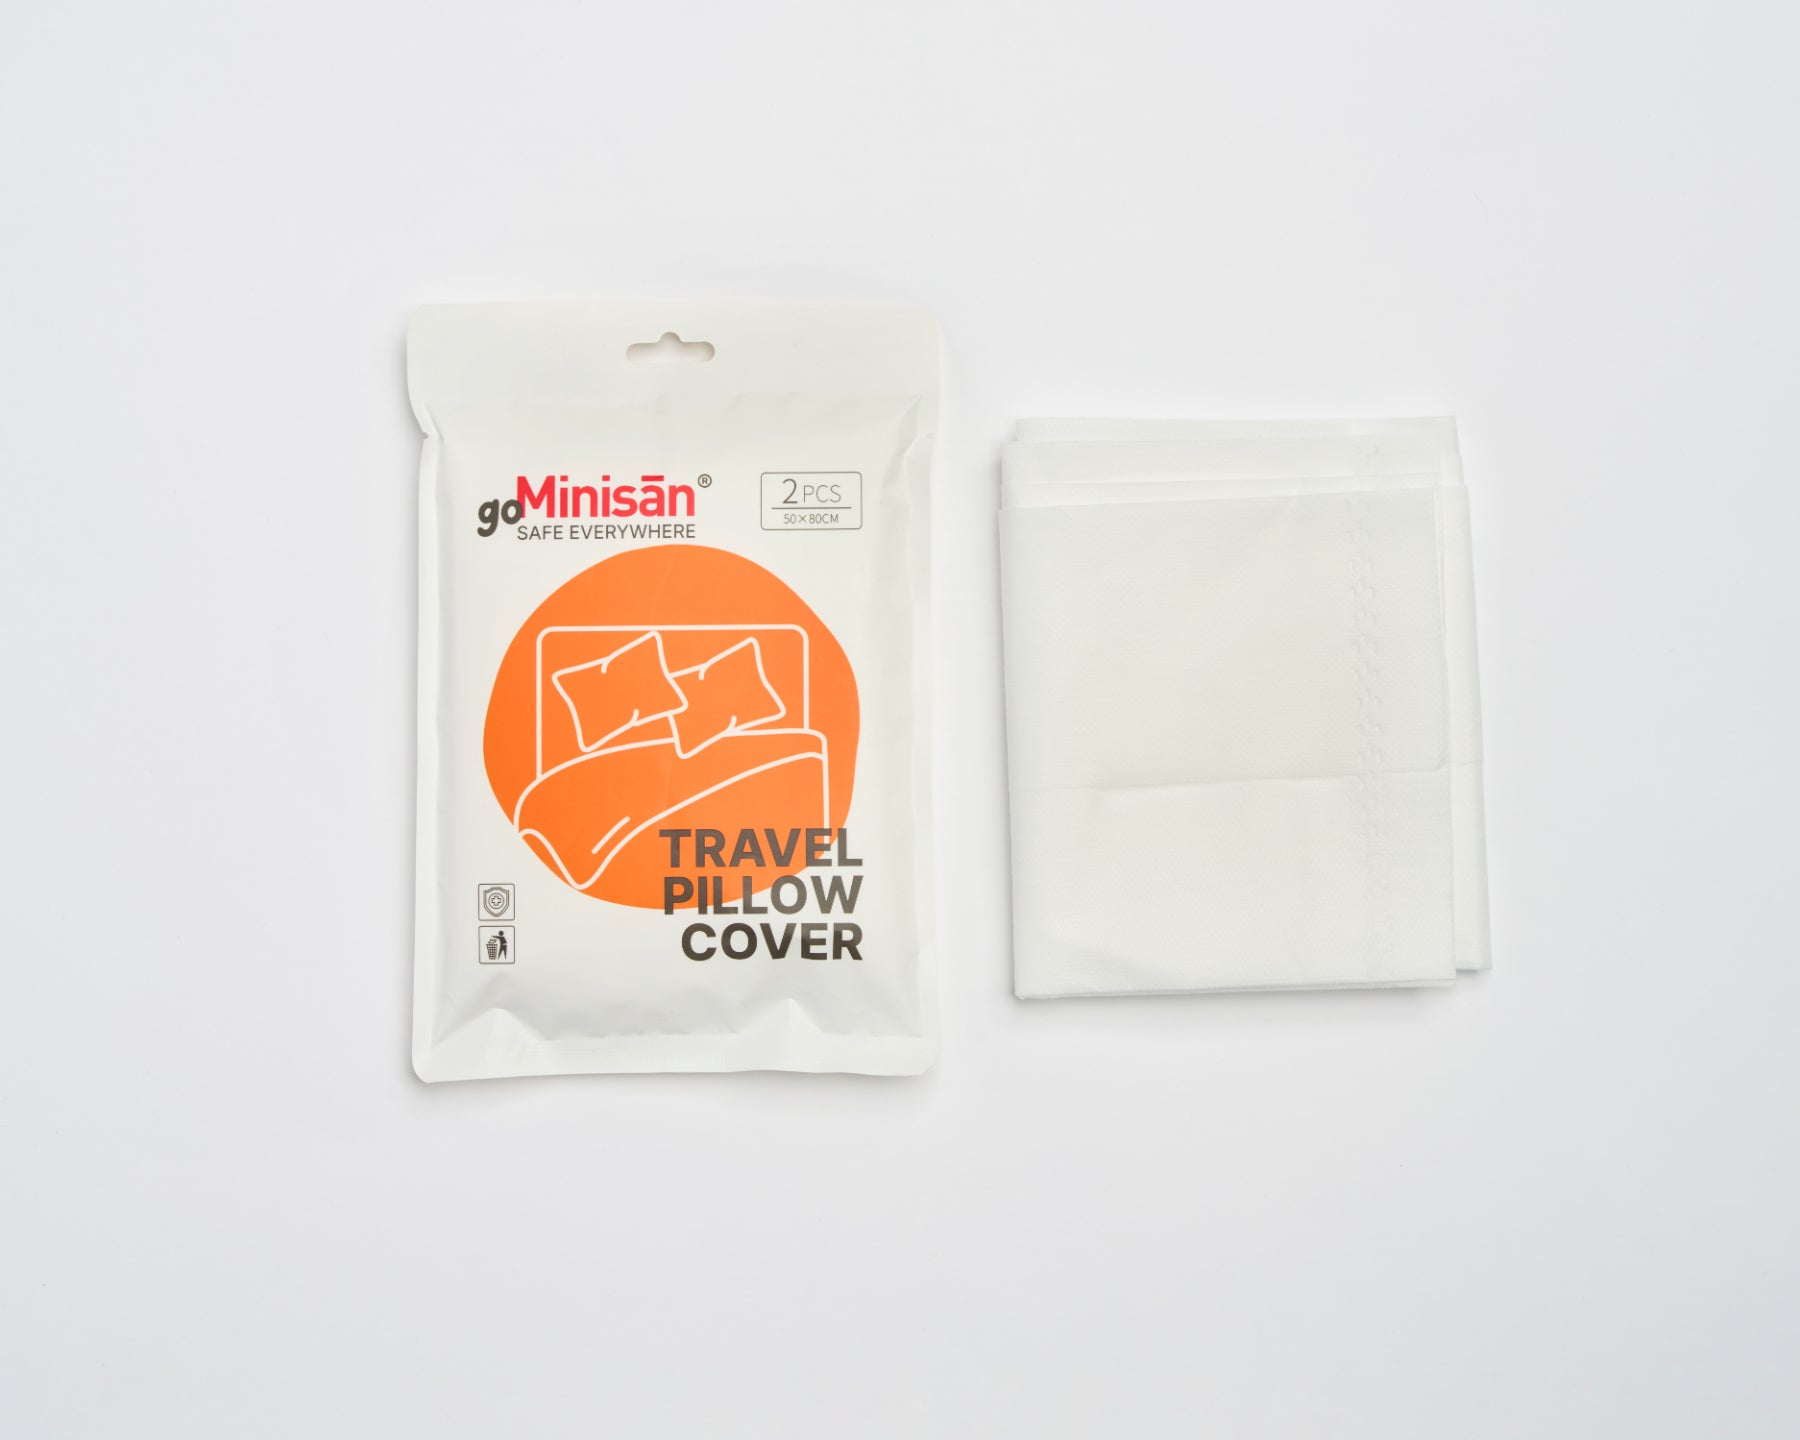 2 SMART PILLOW COVERS: HYGIENIC & STERILE